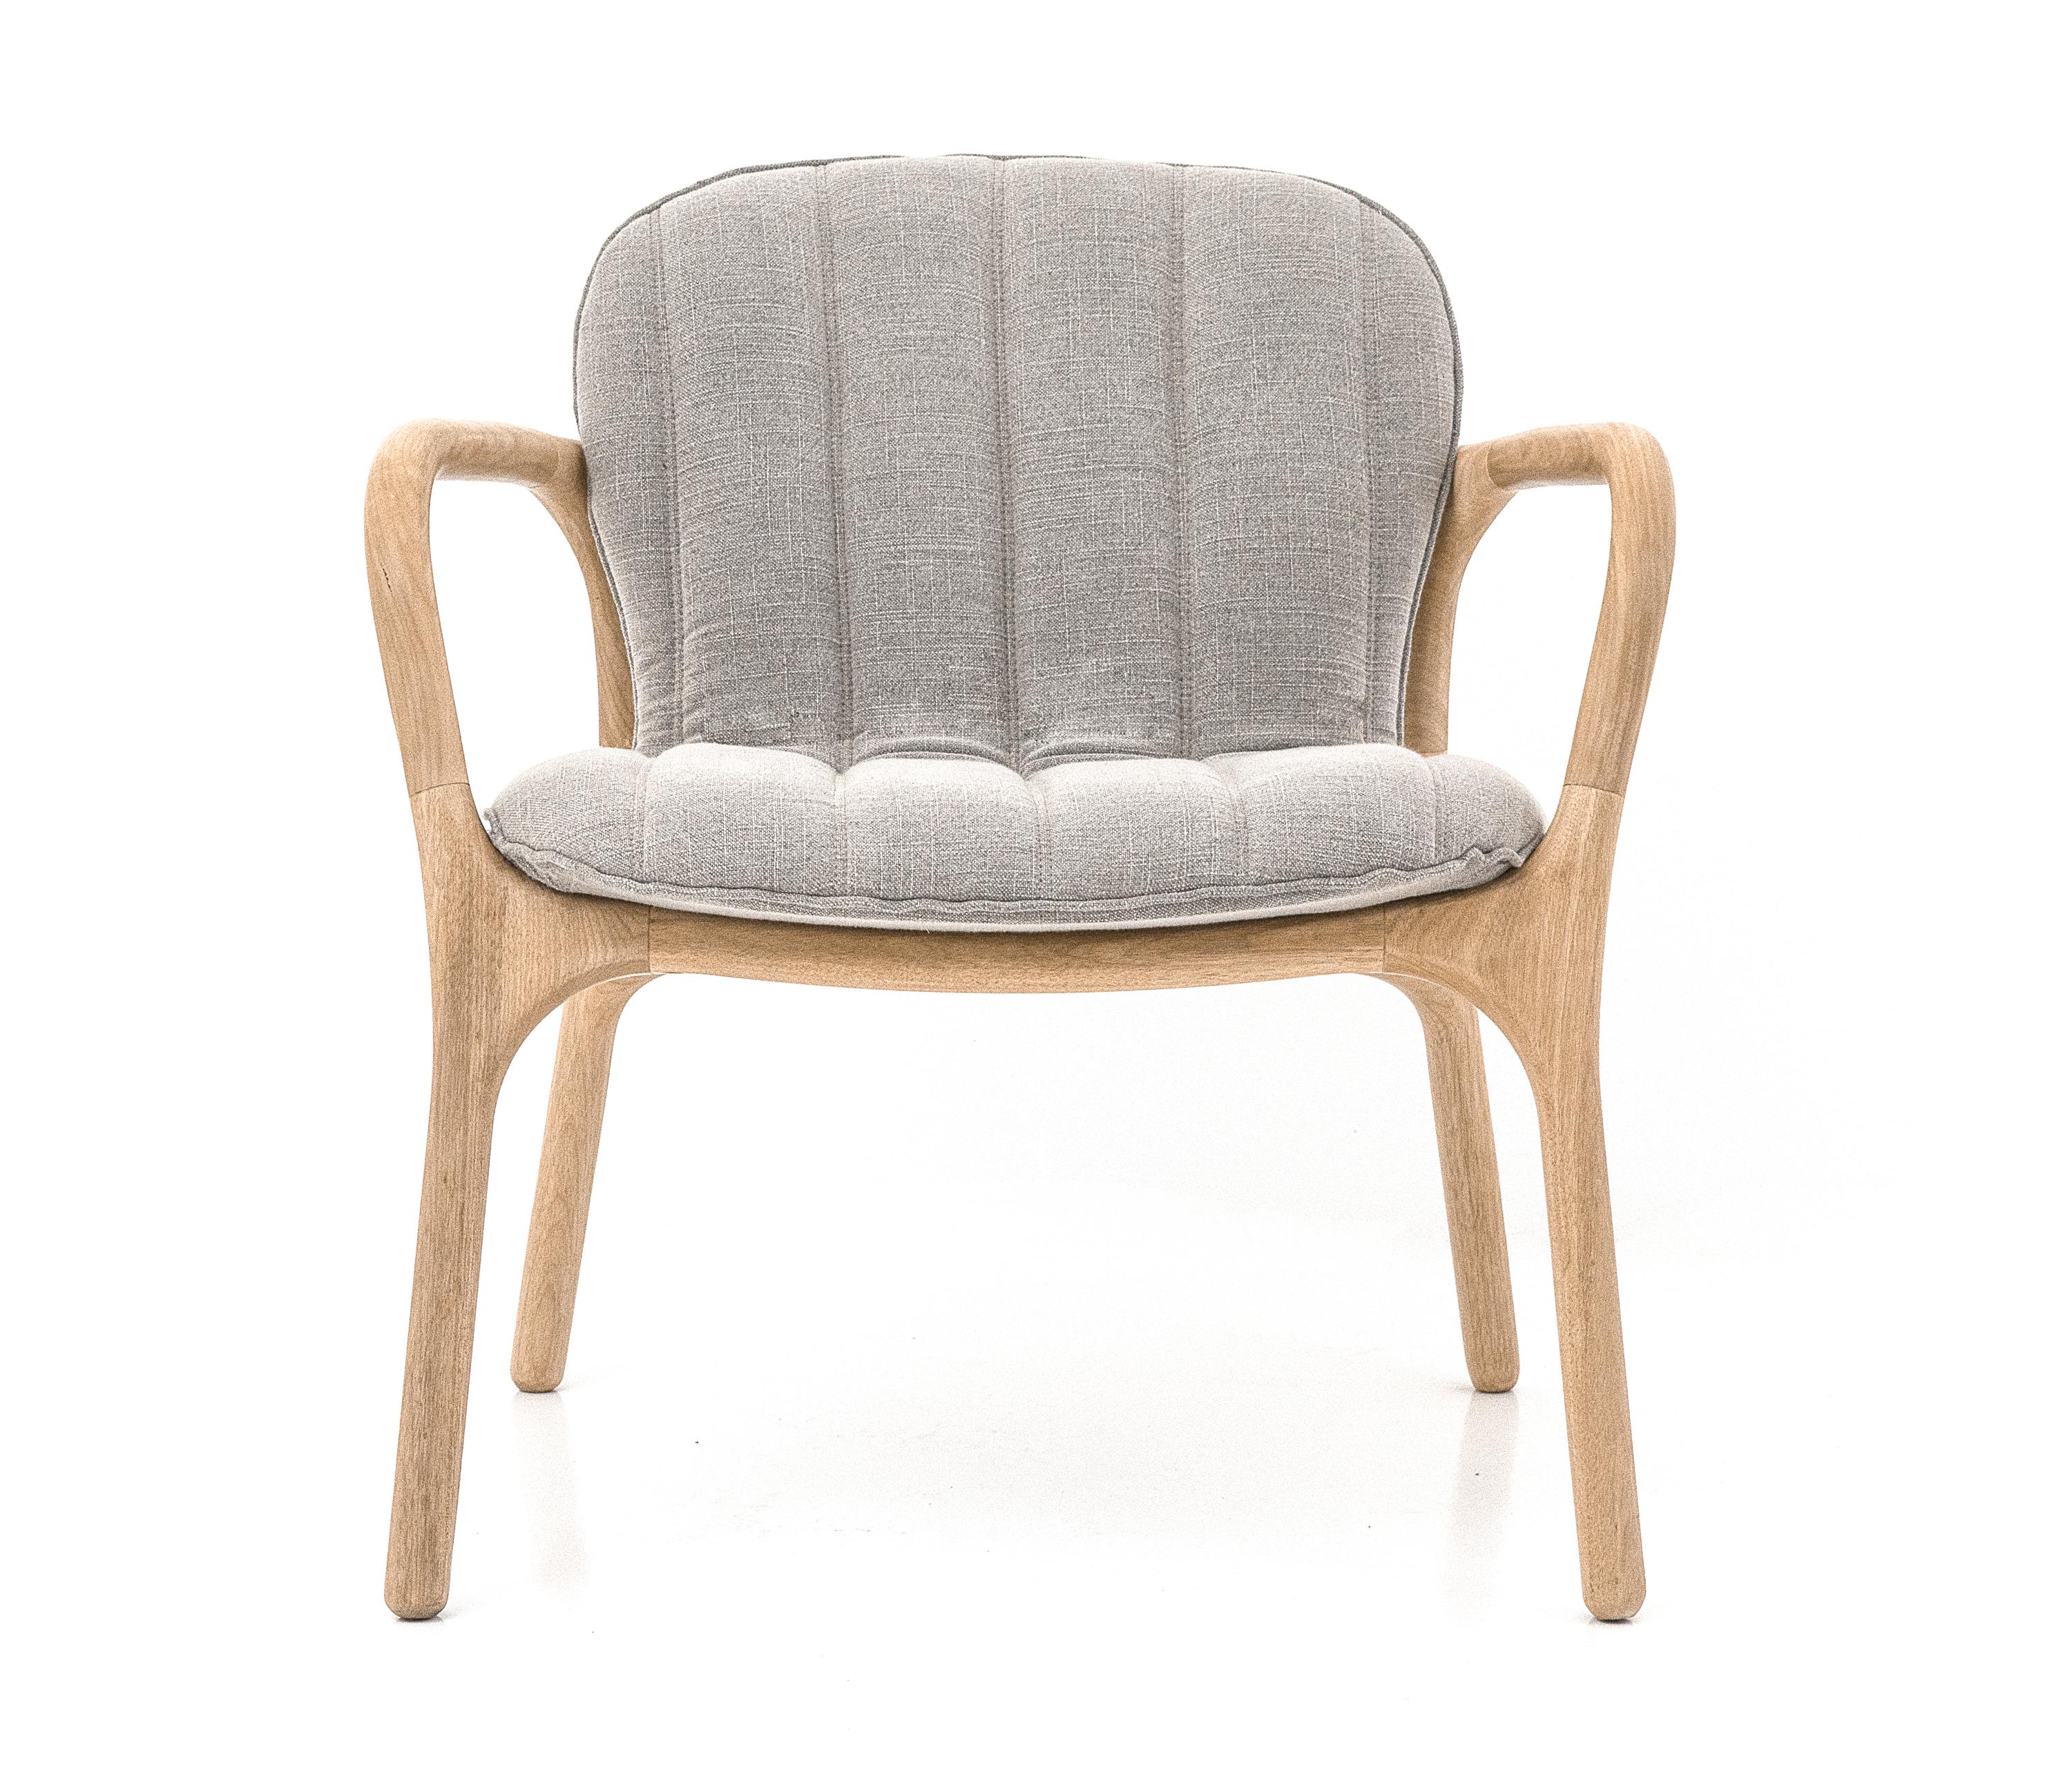 Armchair with wooden structure and upholstered seat. The first sketches of the Coral Line, consisting of an armchair and a chair, start from the observation of marine life, shells and crustaceans.
The formal result seeks textures and shapes that